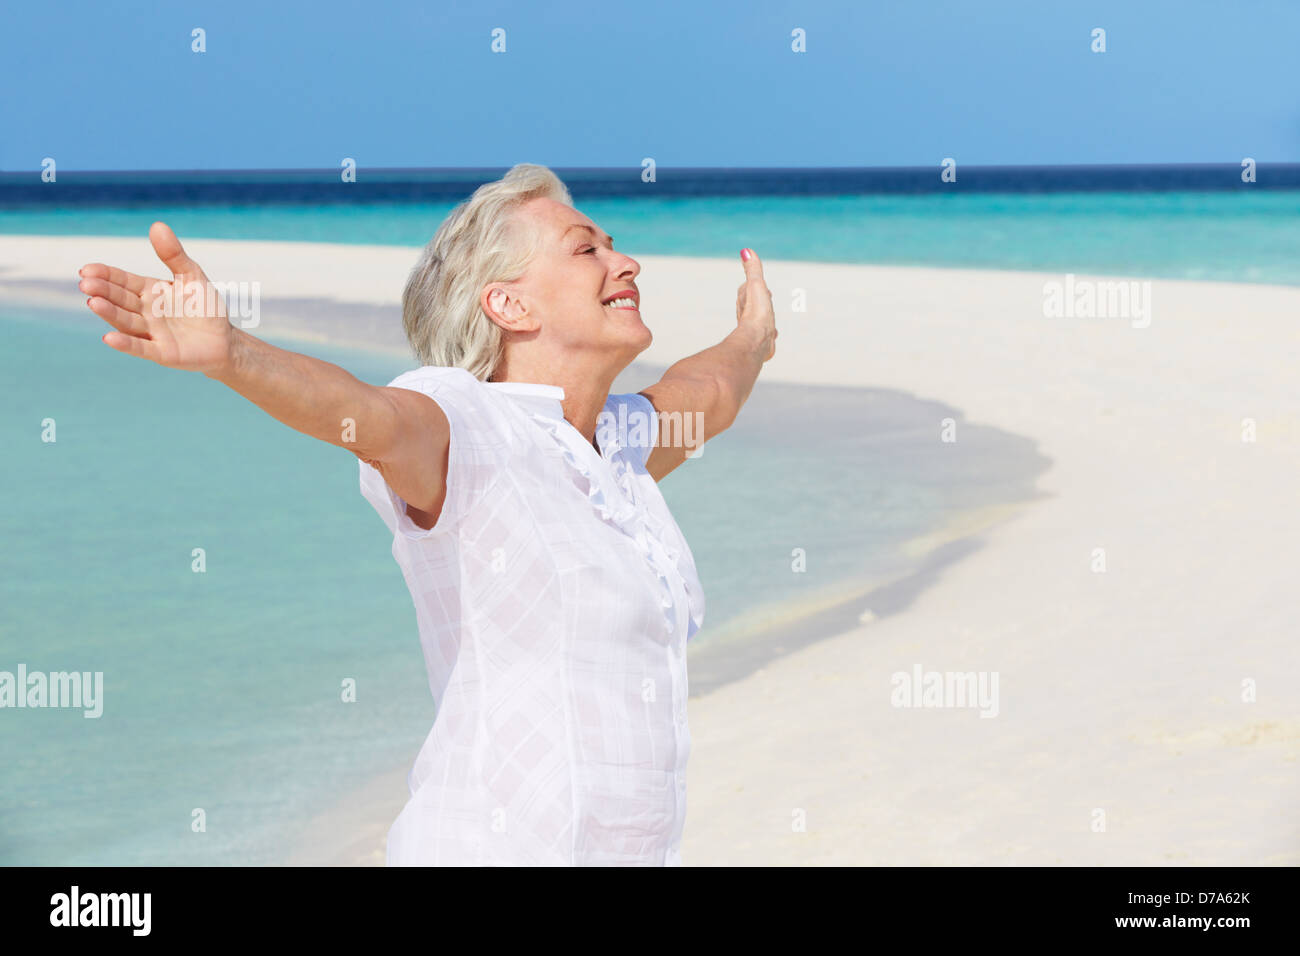 Senior Woman With Arms Outstretched sur Belle Plage Banque D'Images